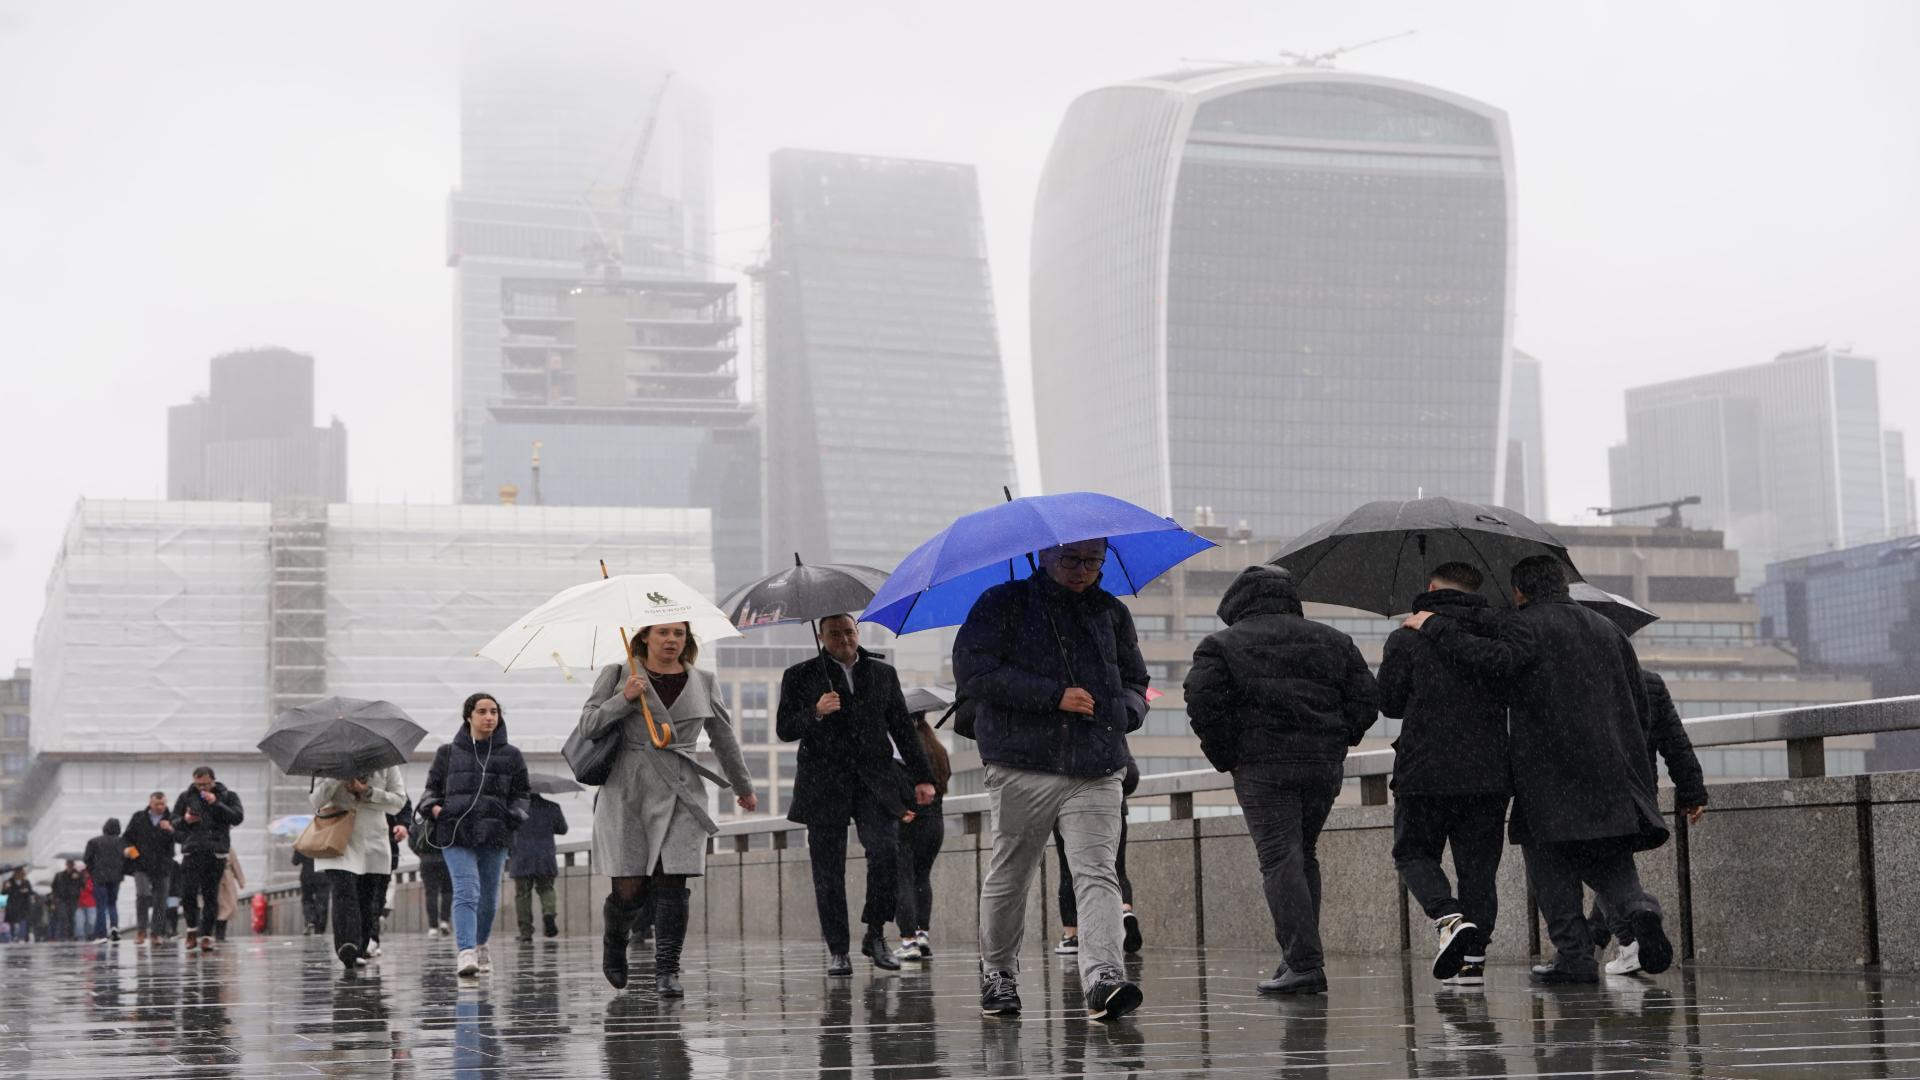 UK to suffer slowest growth of all rich nations next year, OECD says